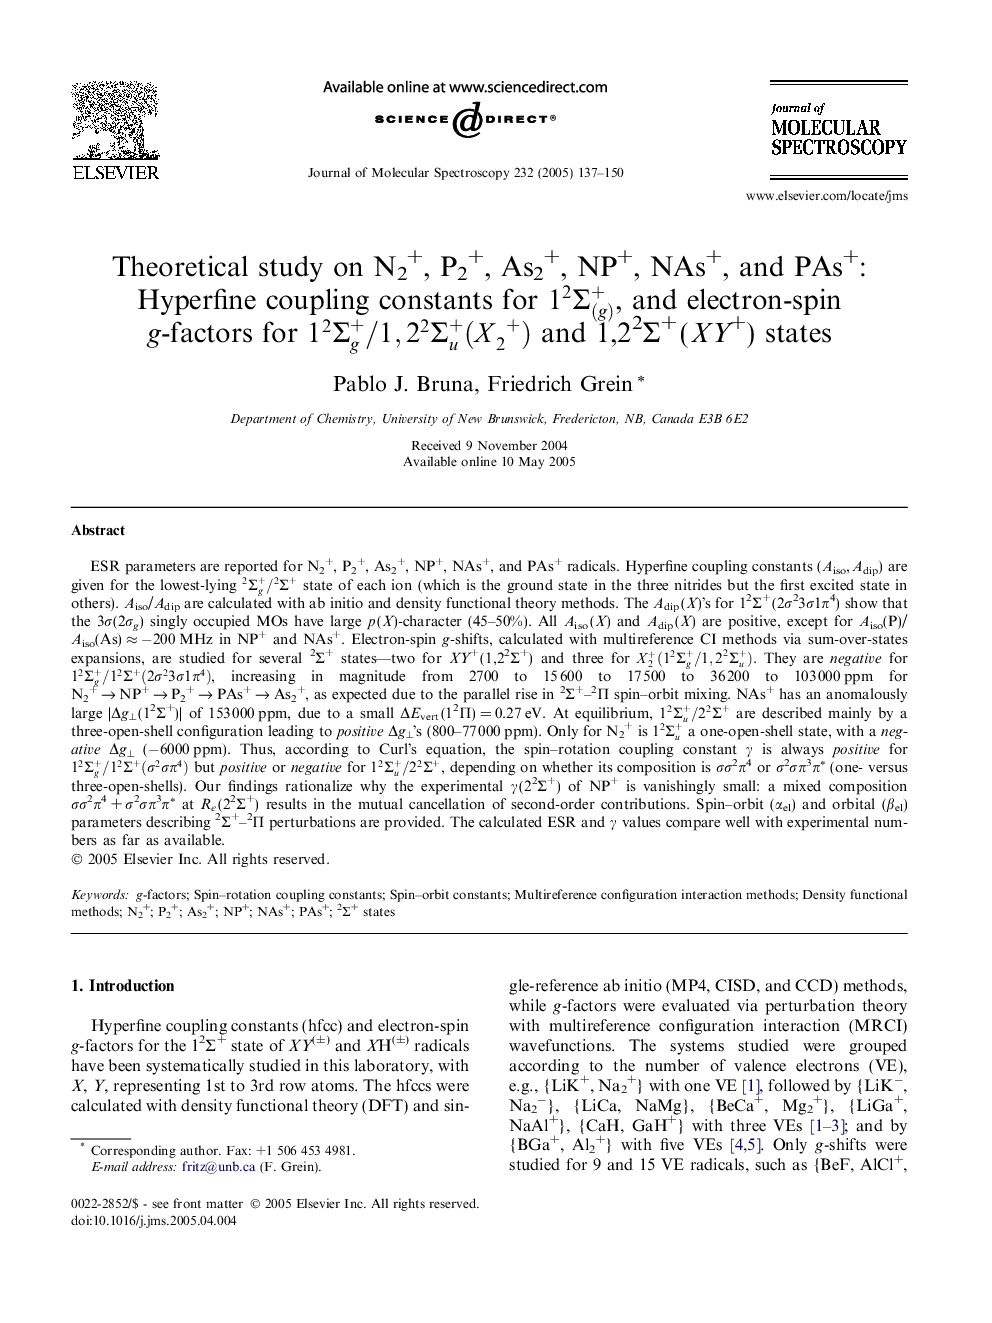 Theoretical study on N2+, P2+, As2+, NP+, NAs+, and PAs+: Hyperfine coupling constants for 12Î£(g)+, and electron-spin g-factors for 12Î£g+/1,22Î£u+(X2+) and 1,22Î£+Â (XY+) states